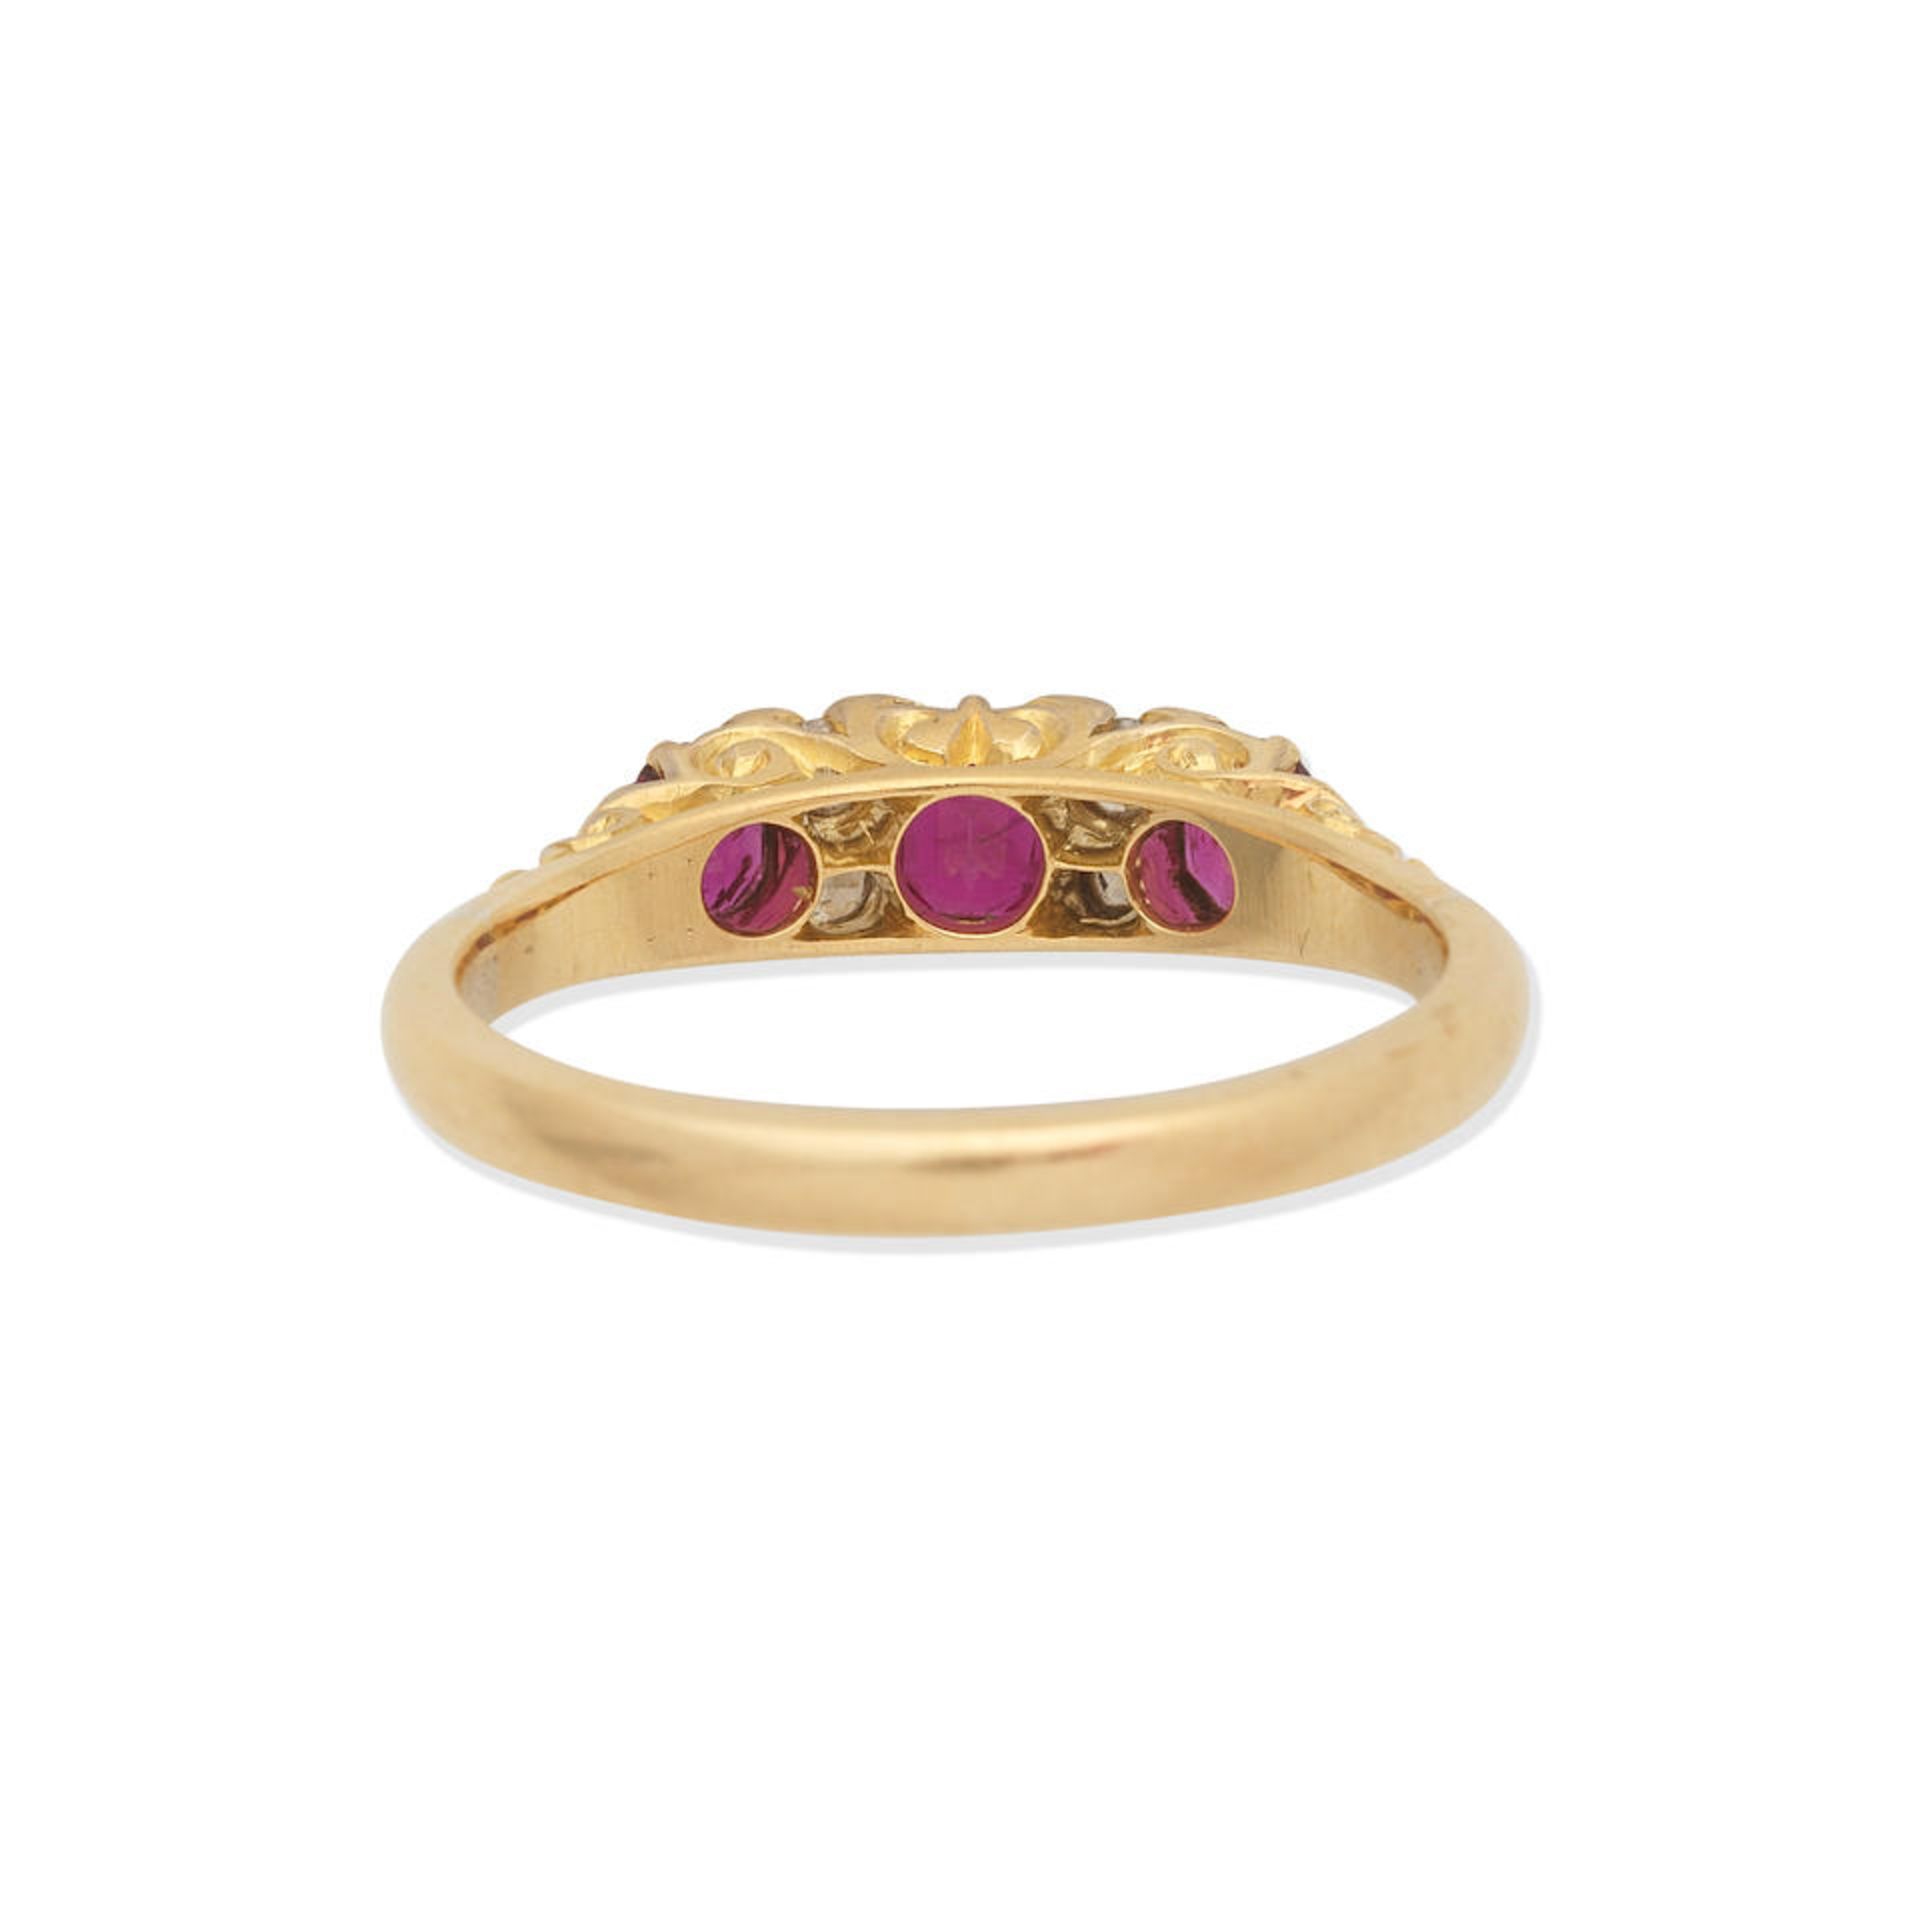 RUBY AND DIAMOND RING - Image 2 of 3